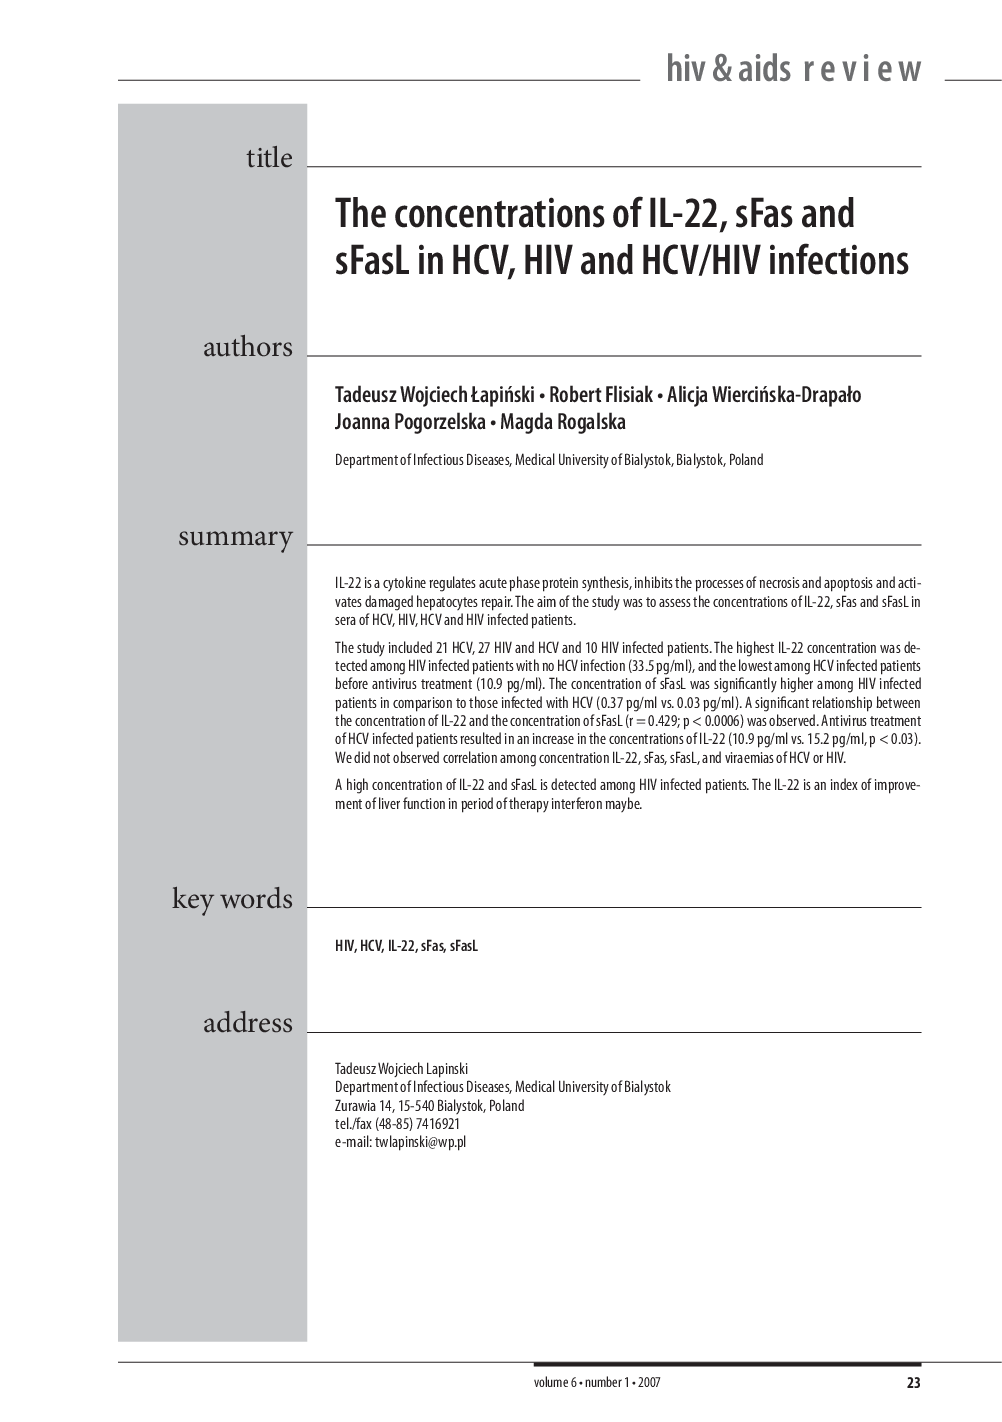 The concentrations of IL-22, sFas and sFasL in HCV, HIV and HCV/HIV infections